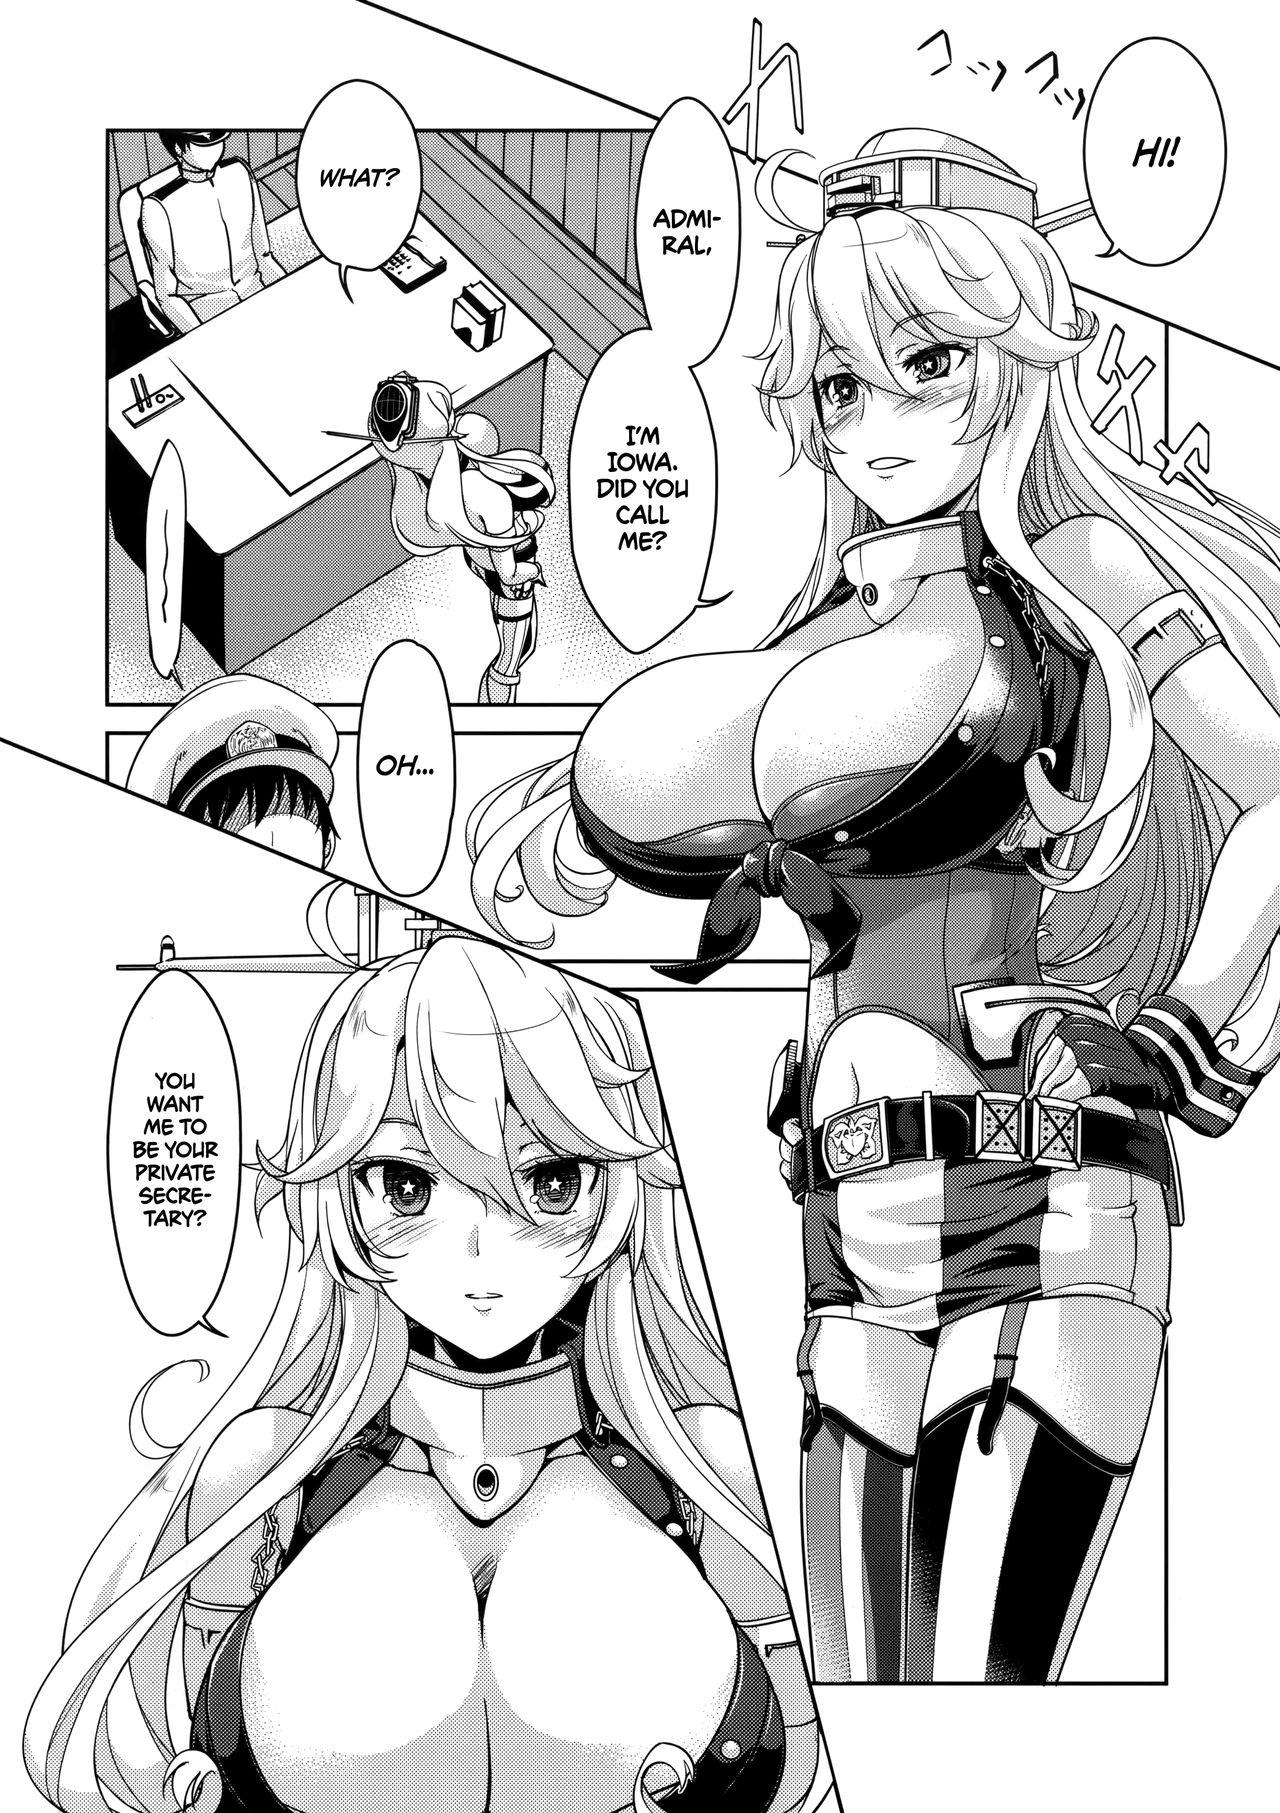 Swinger I owant you! - Kantai collection  - Page 3